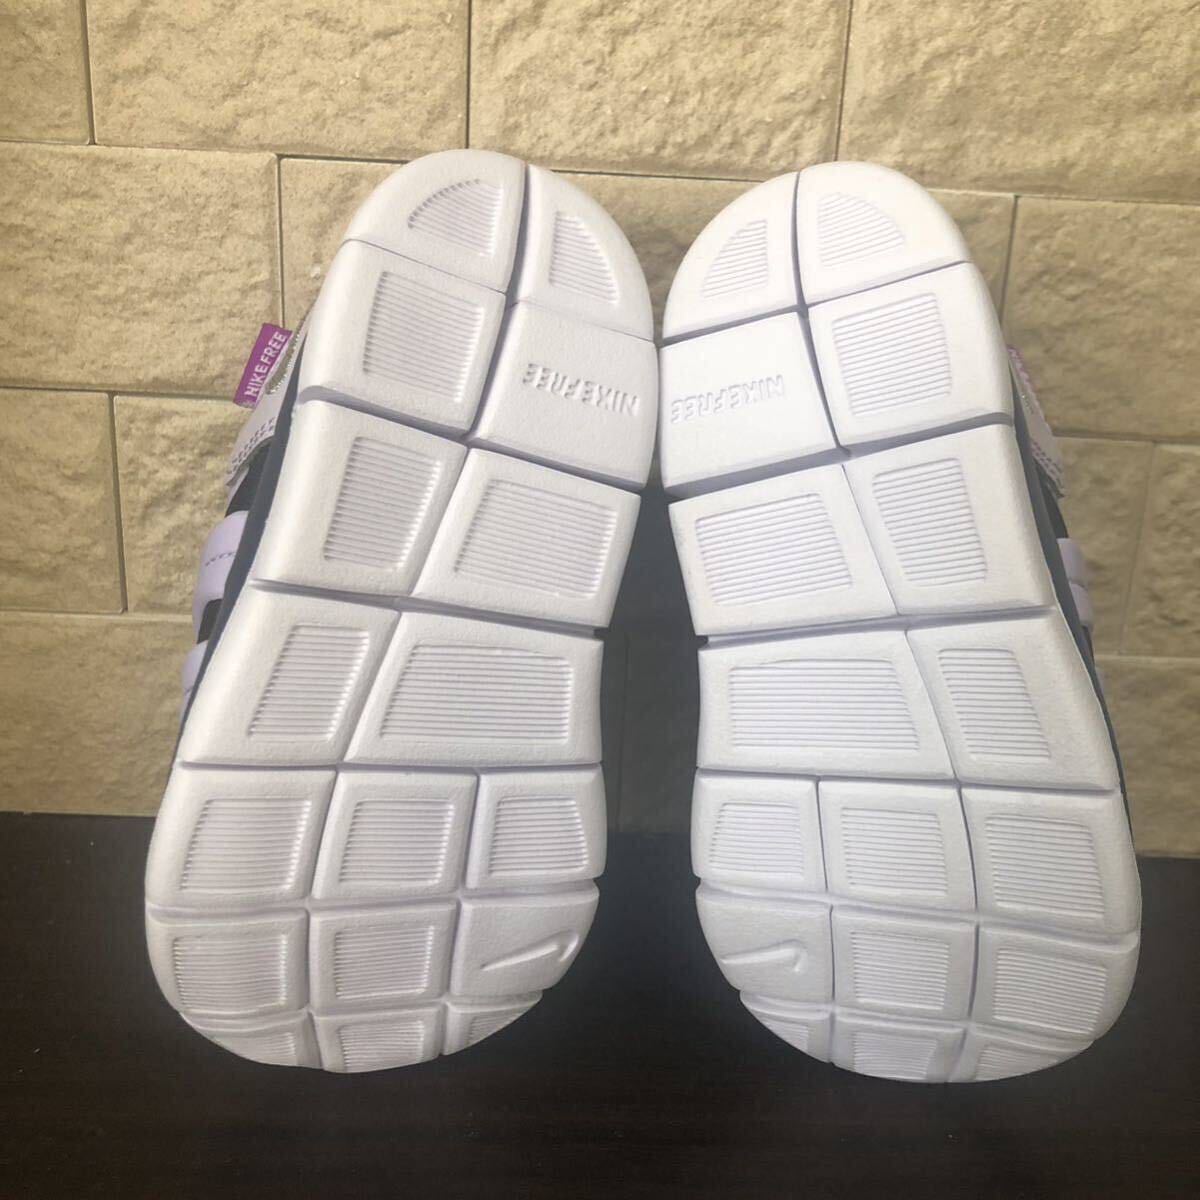  new goods unused Nike NIKE Dynamo free sneakers slip-on shoes 13cm child care ....... commuting to kindergarten First shoes 